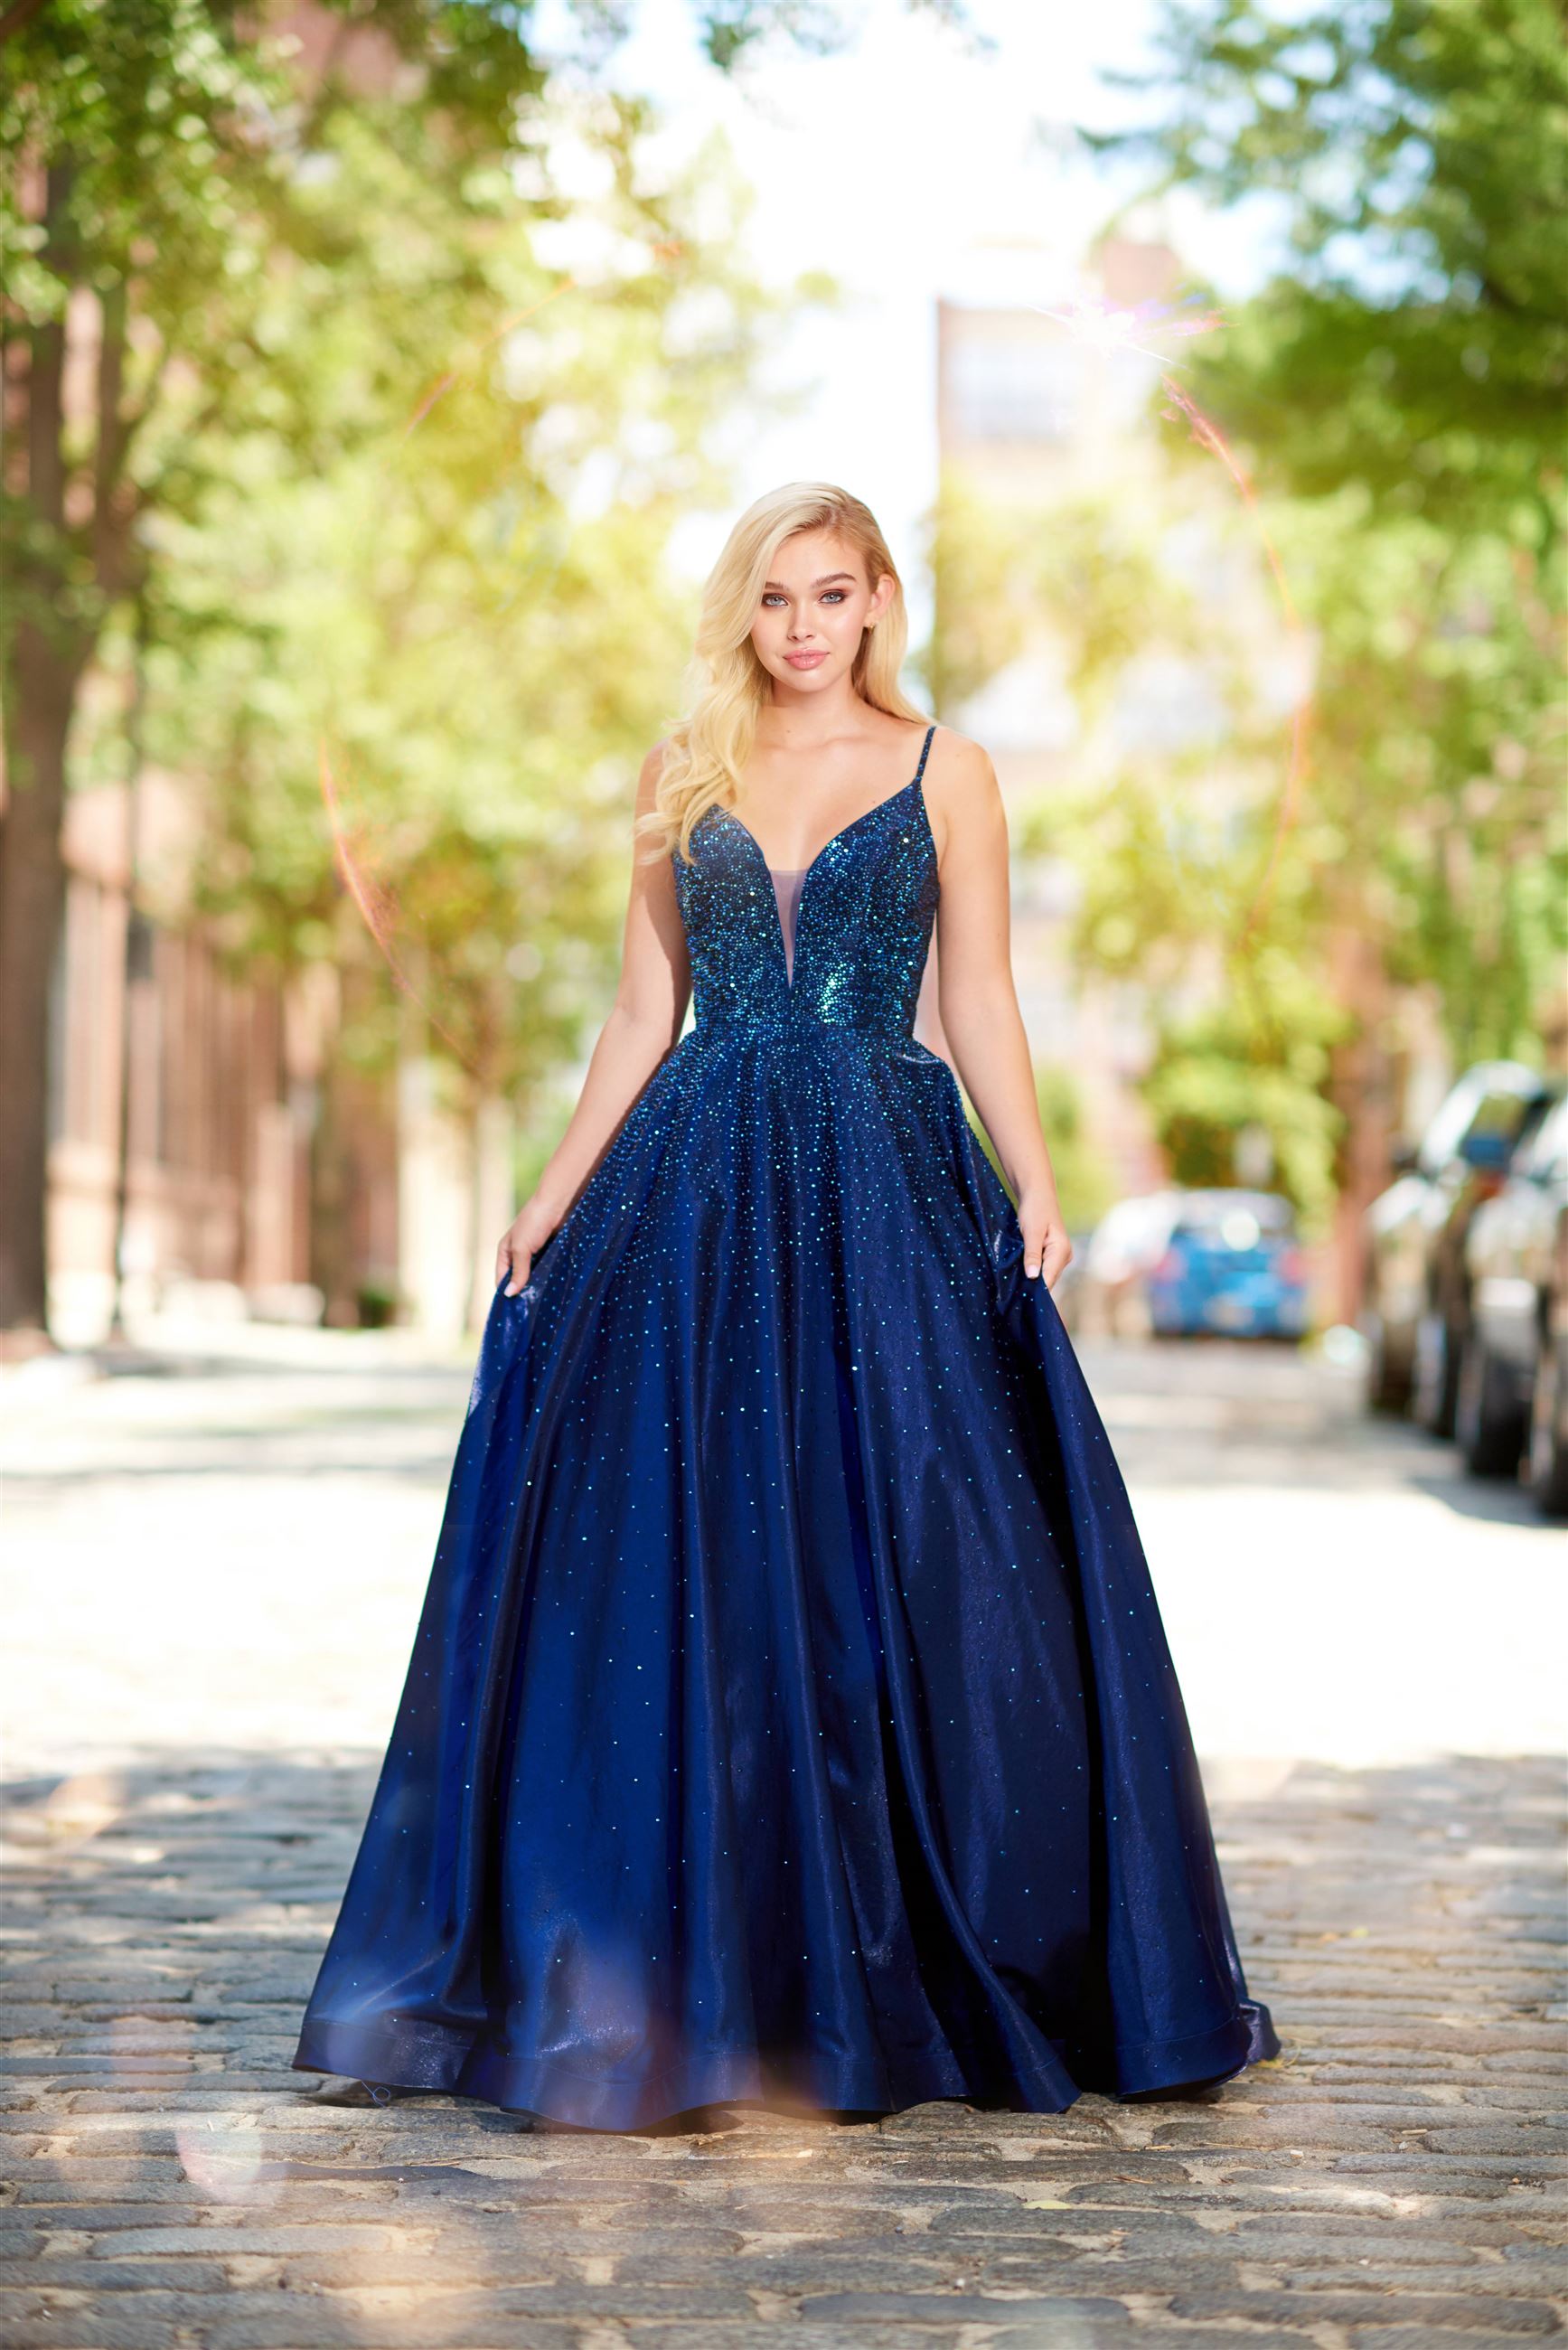 Girl wearing navy blue prom dress with sequin details by Ellie Wilde